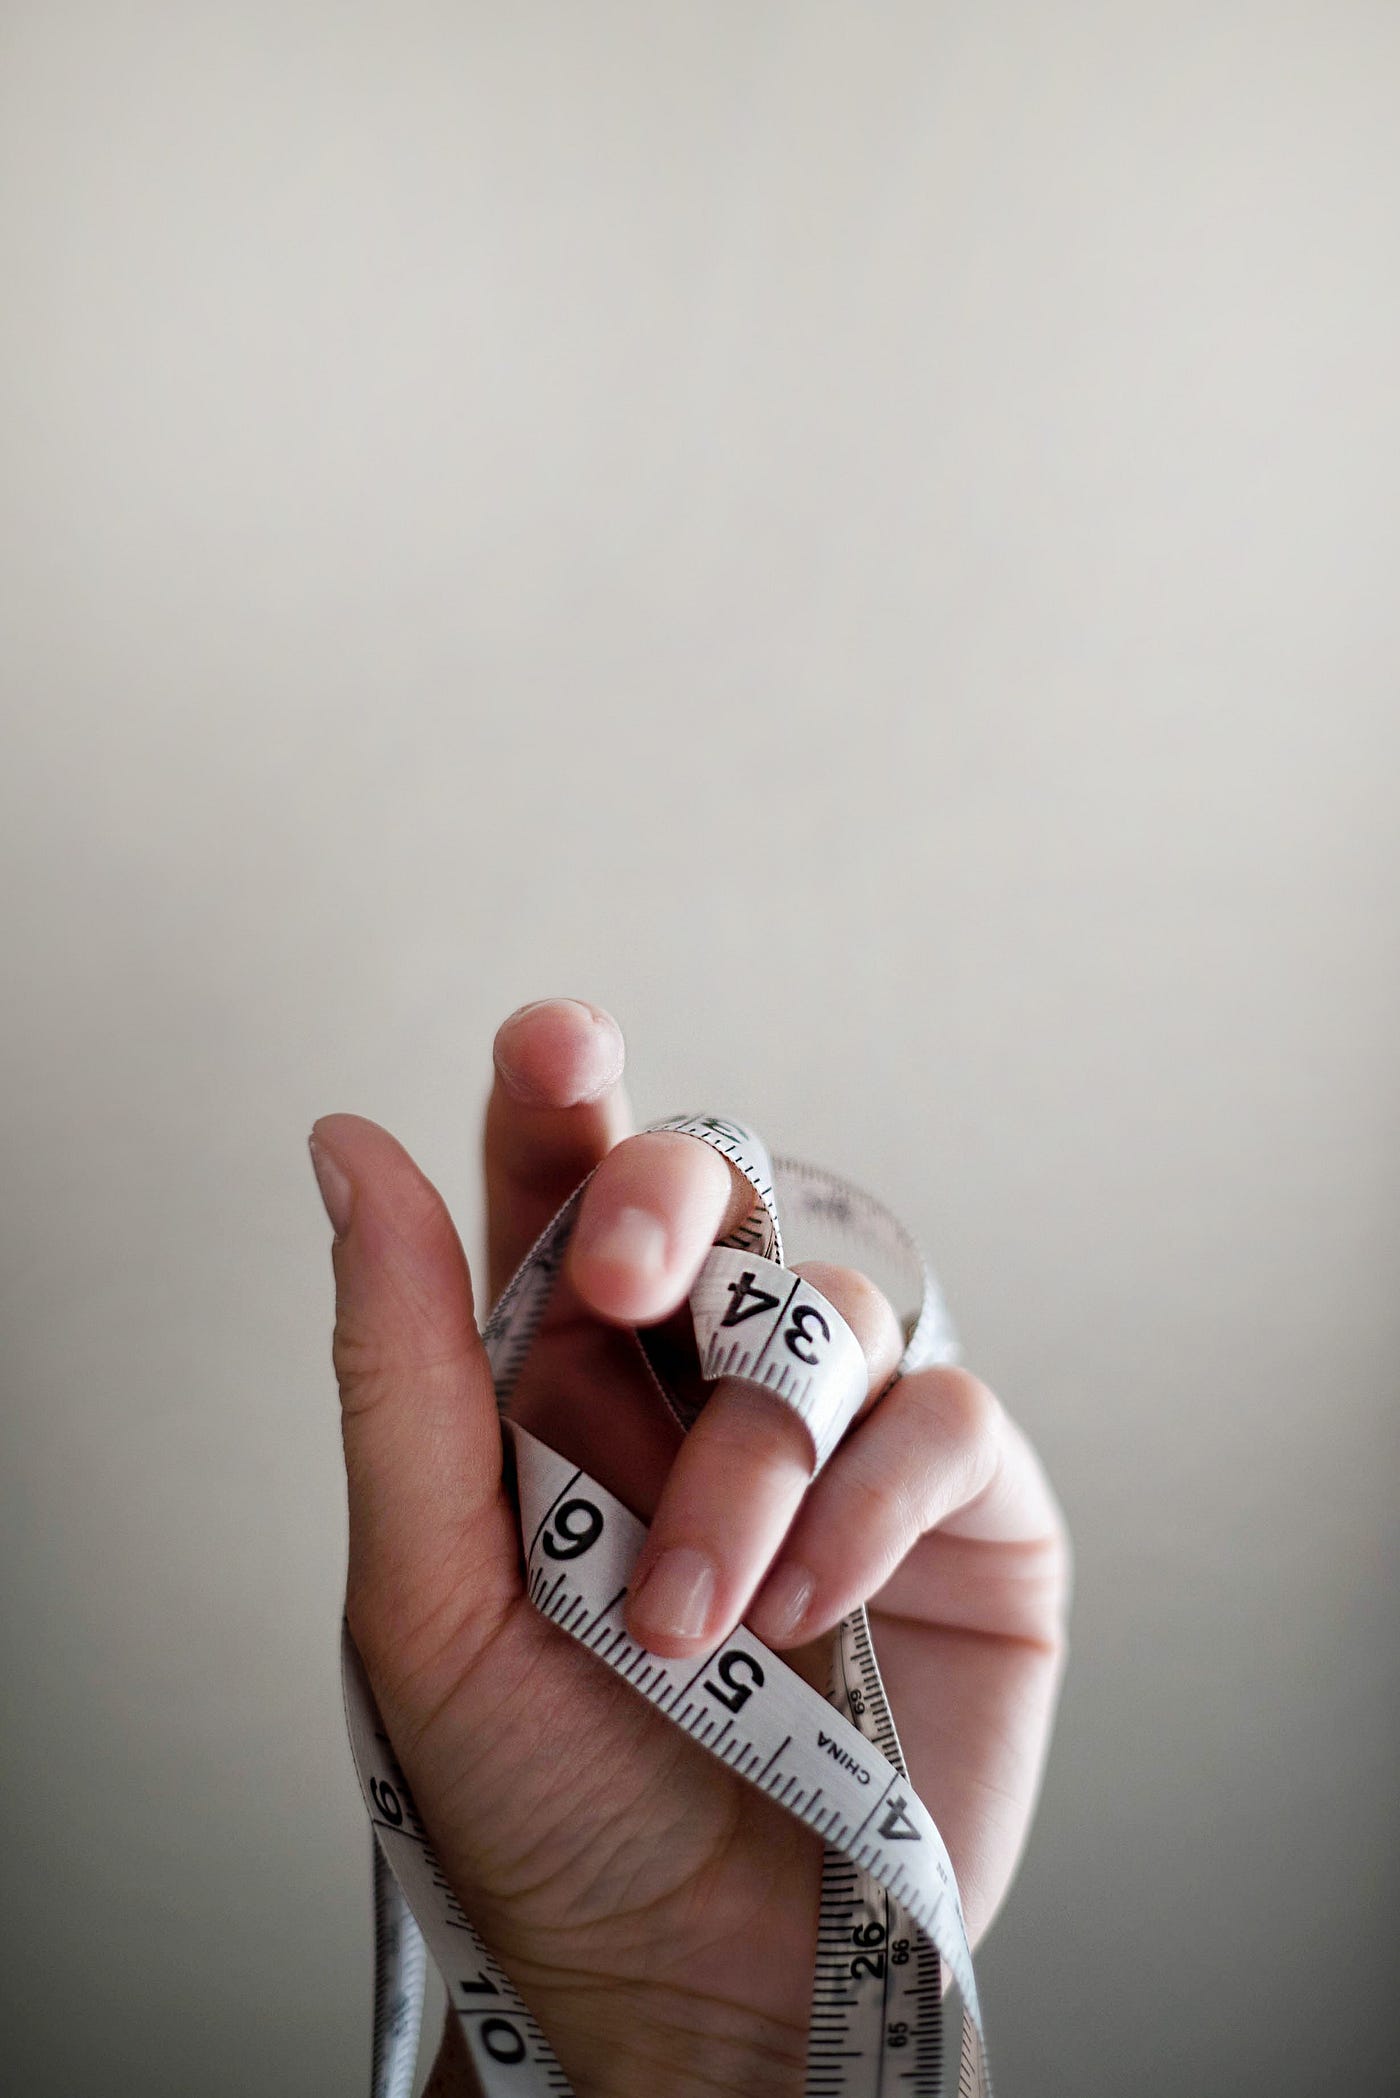 A hand reaches up, holding a paper tape measure that is intertwined with the person’s fingers on the left hand.